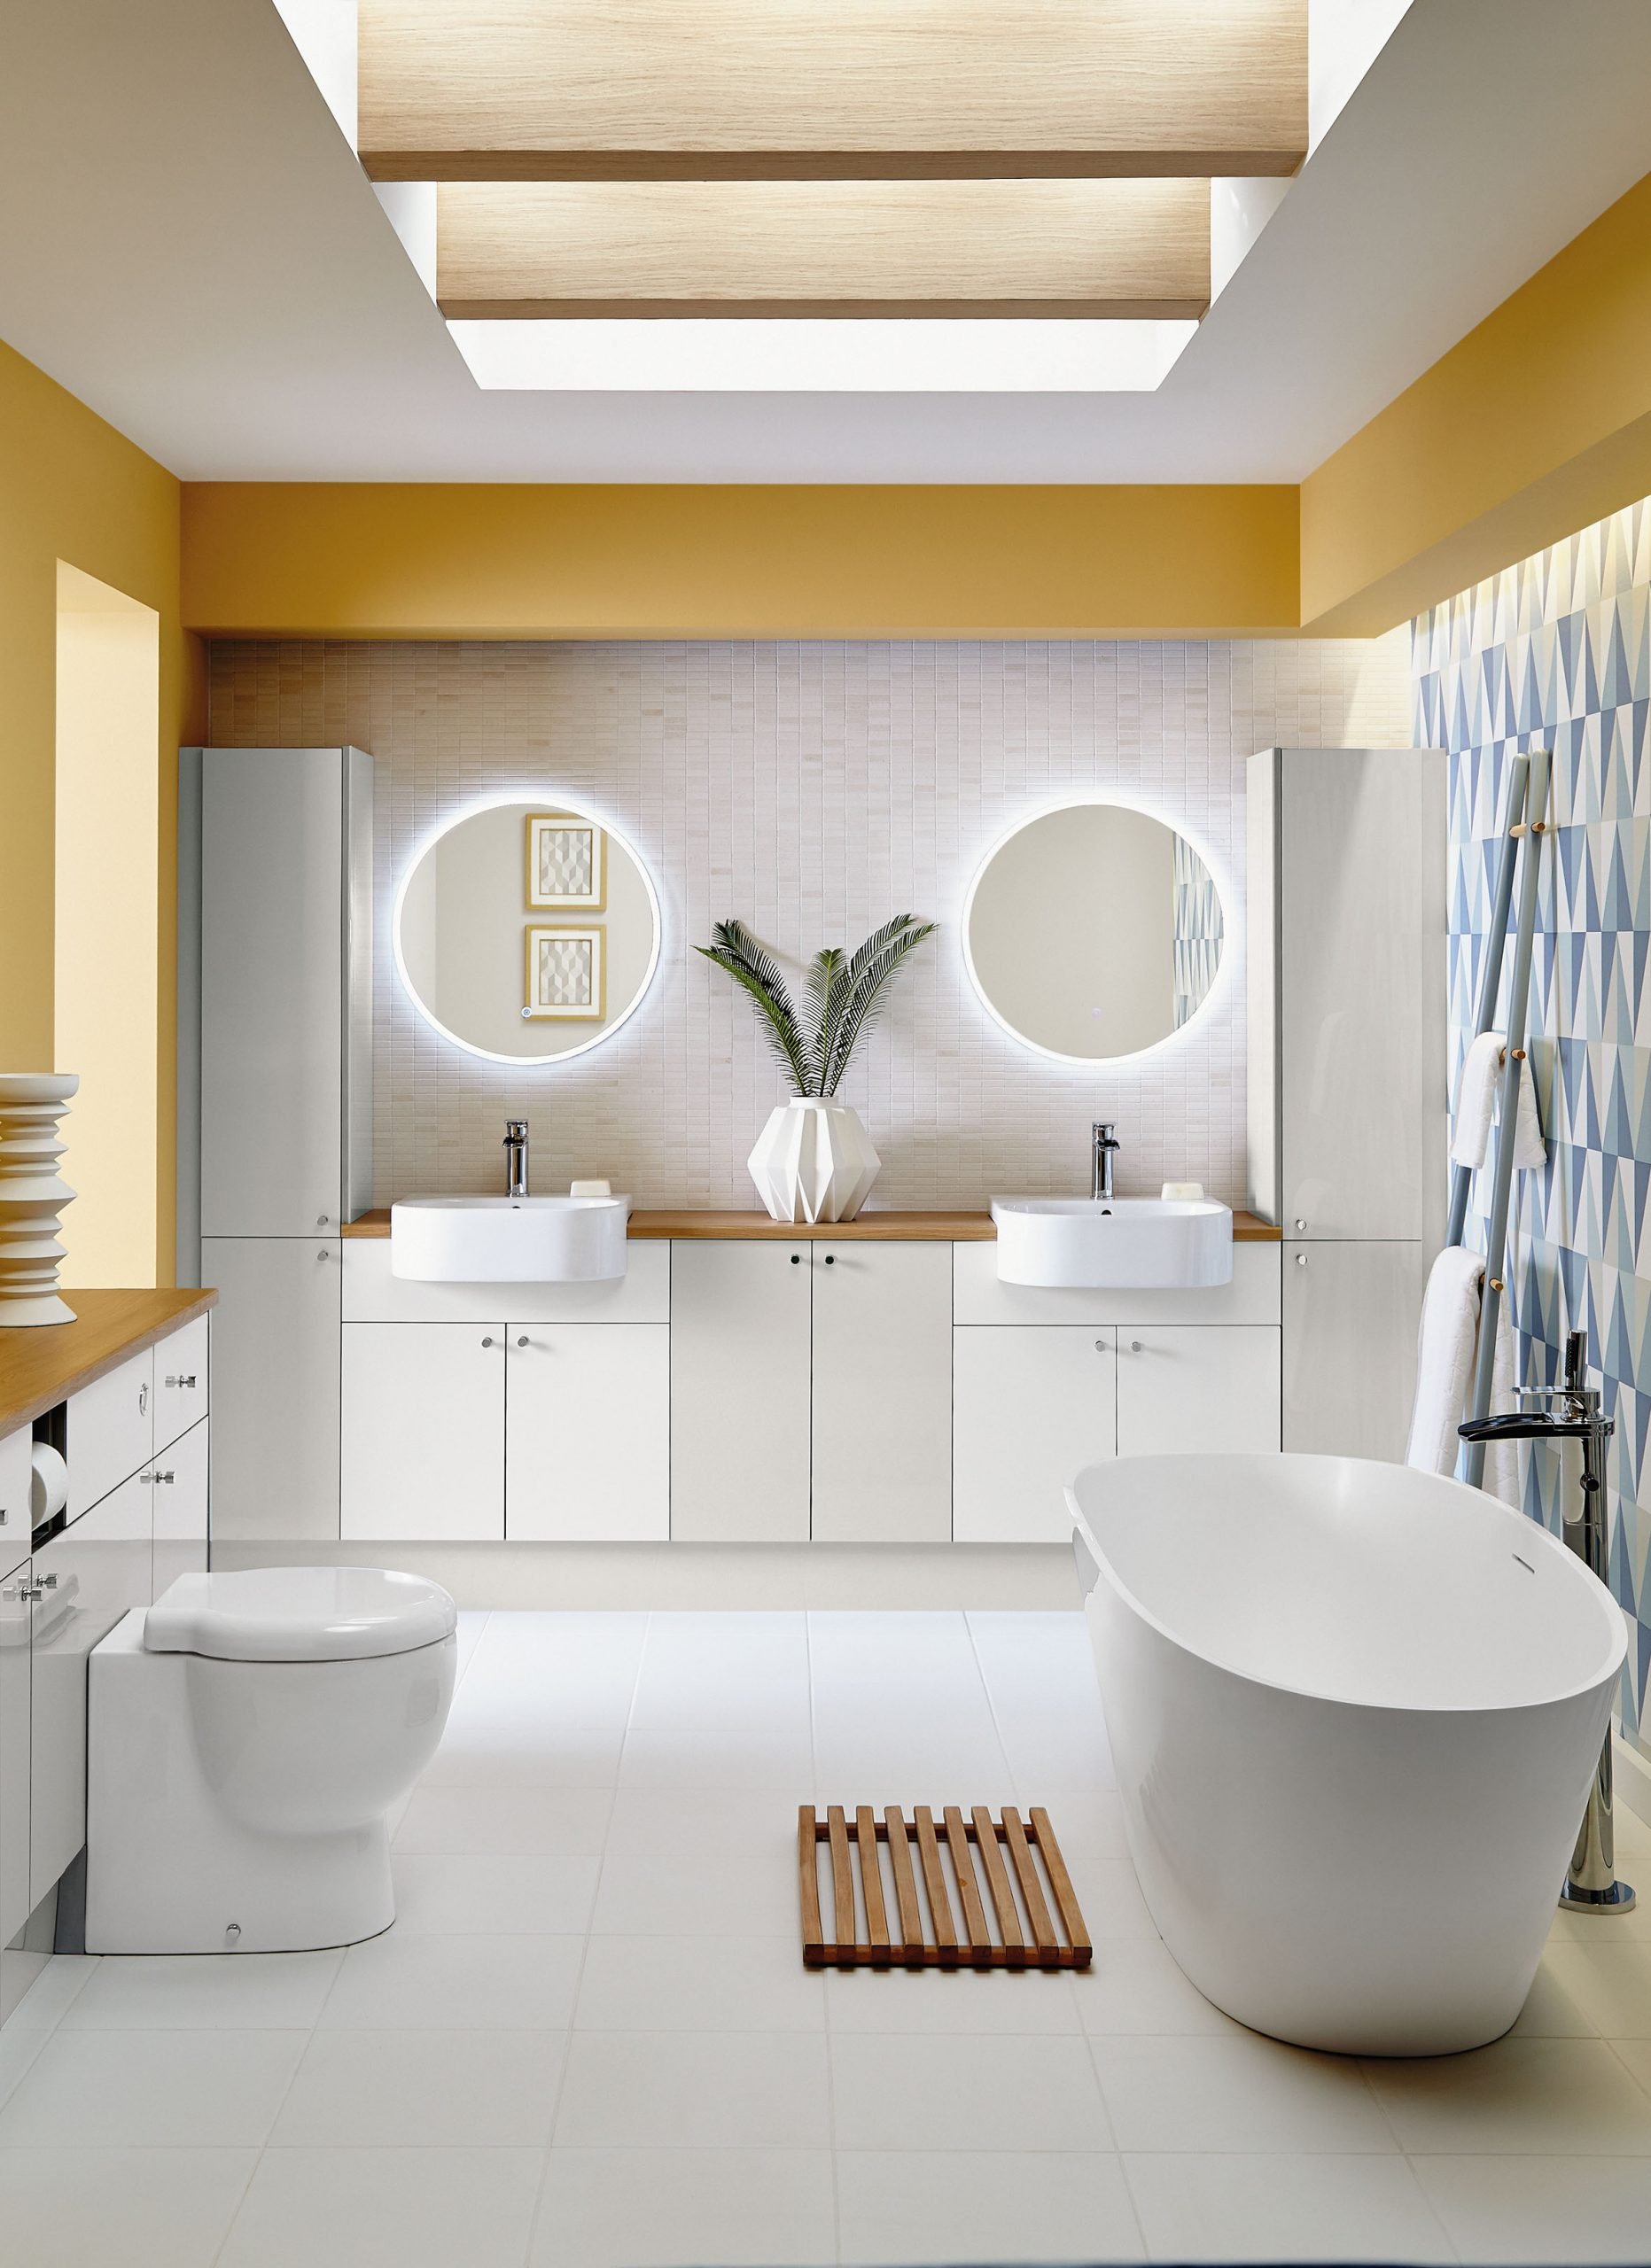 an image of a yellow bathroom with LED lights